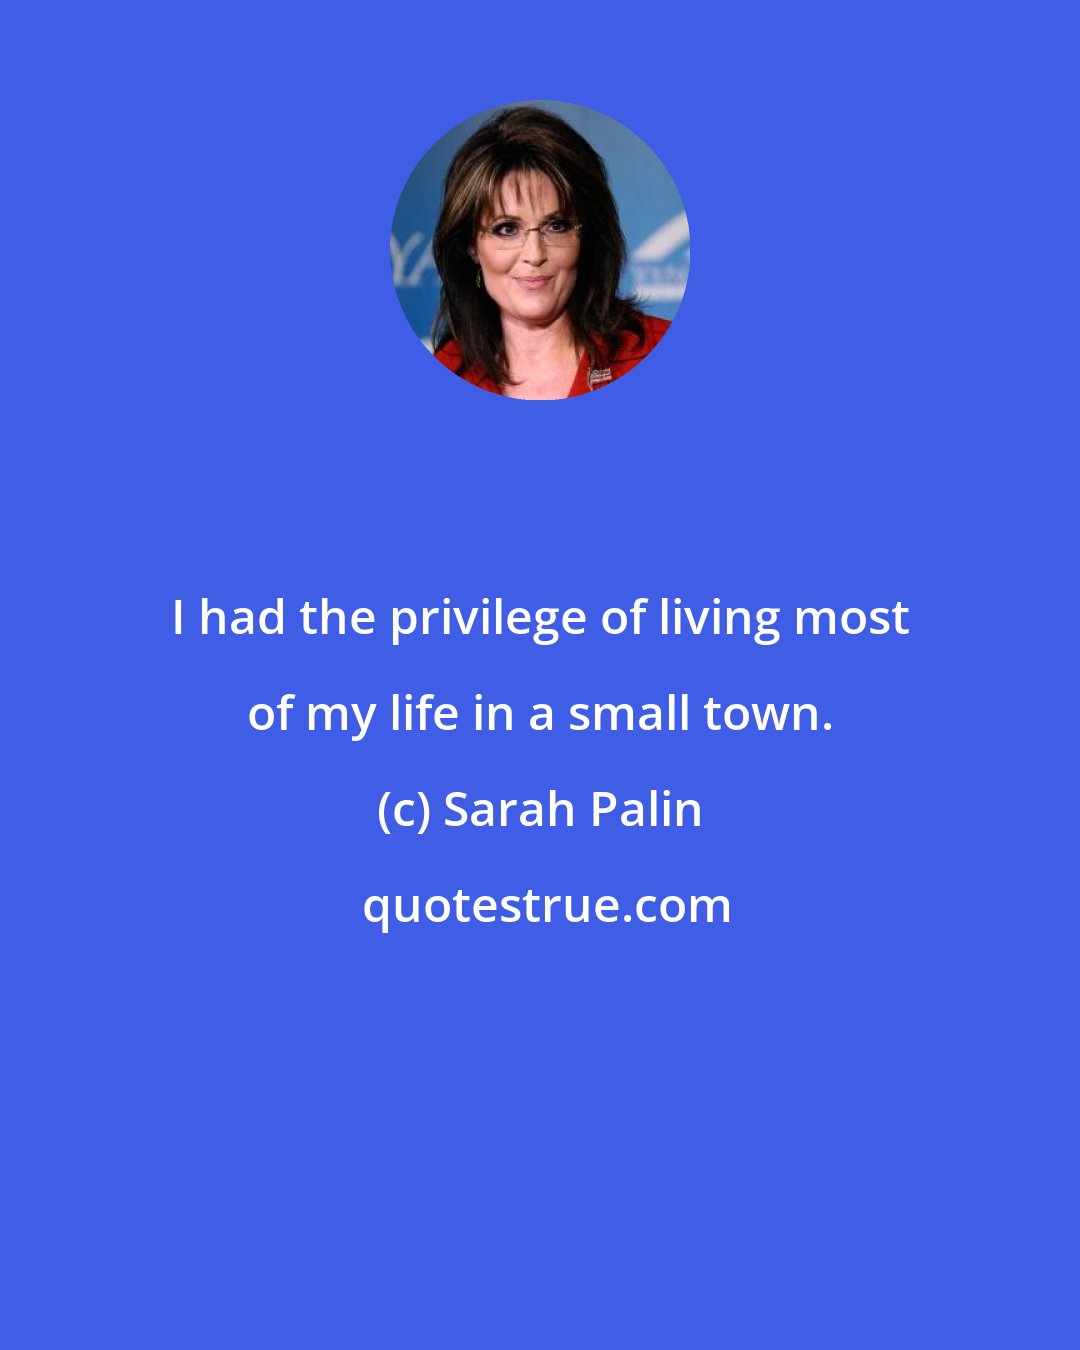 Sarah Palin: I had the privilege of living most of my life in a small town.